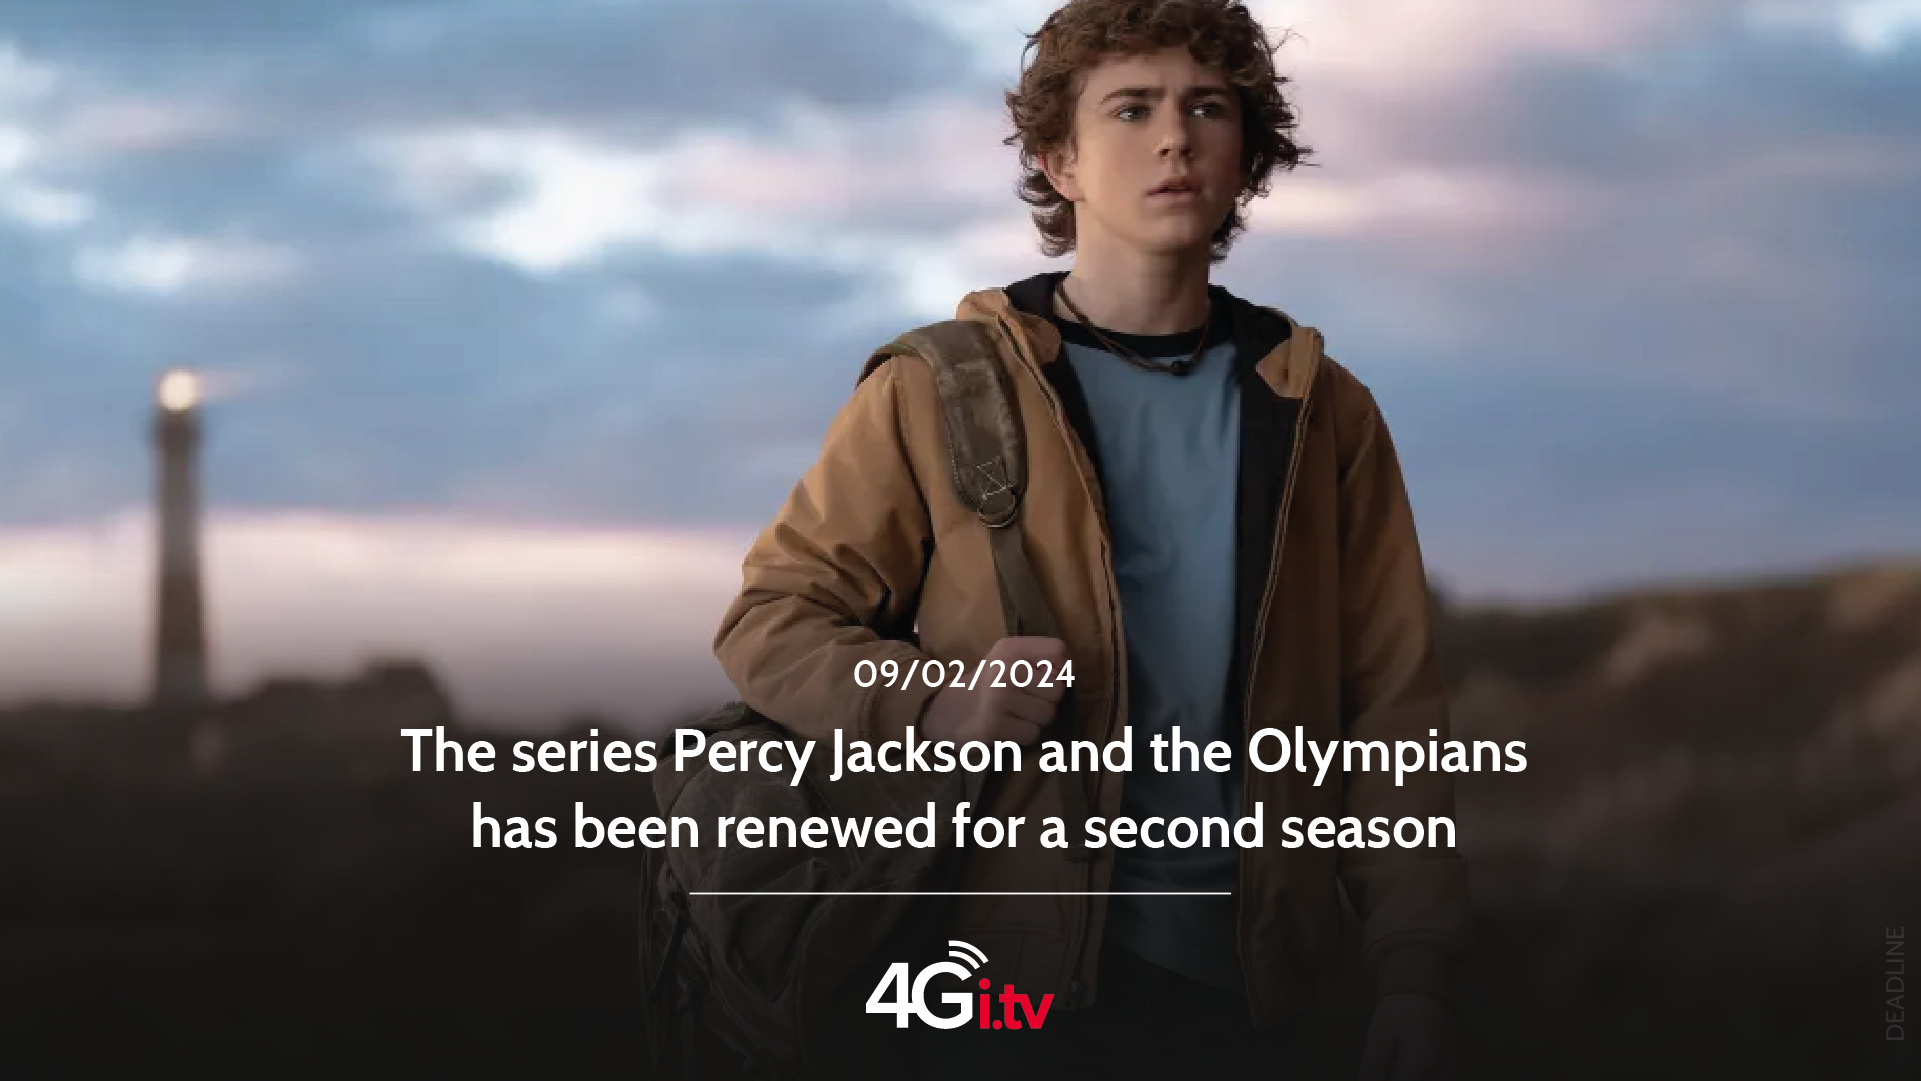 Подробнее о статье The series Percy Jackson and the Olympians has been renewed for a second season 